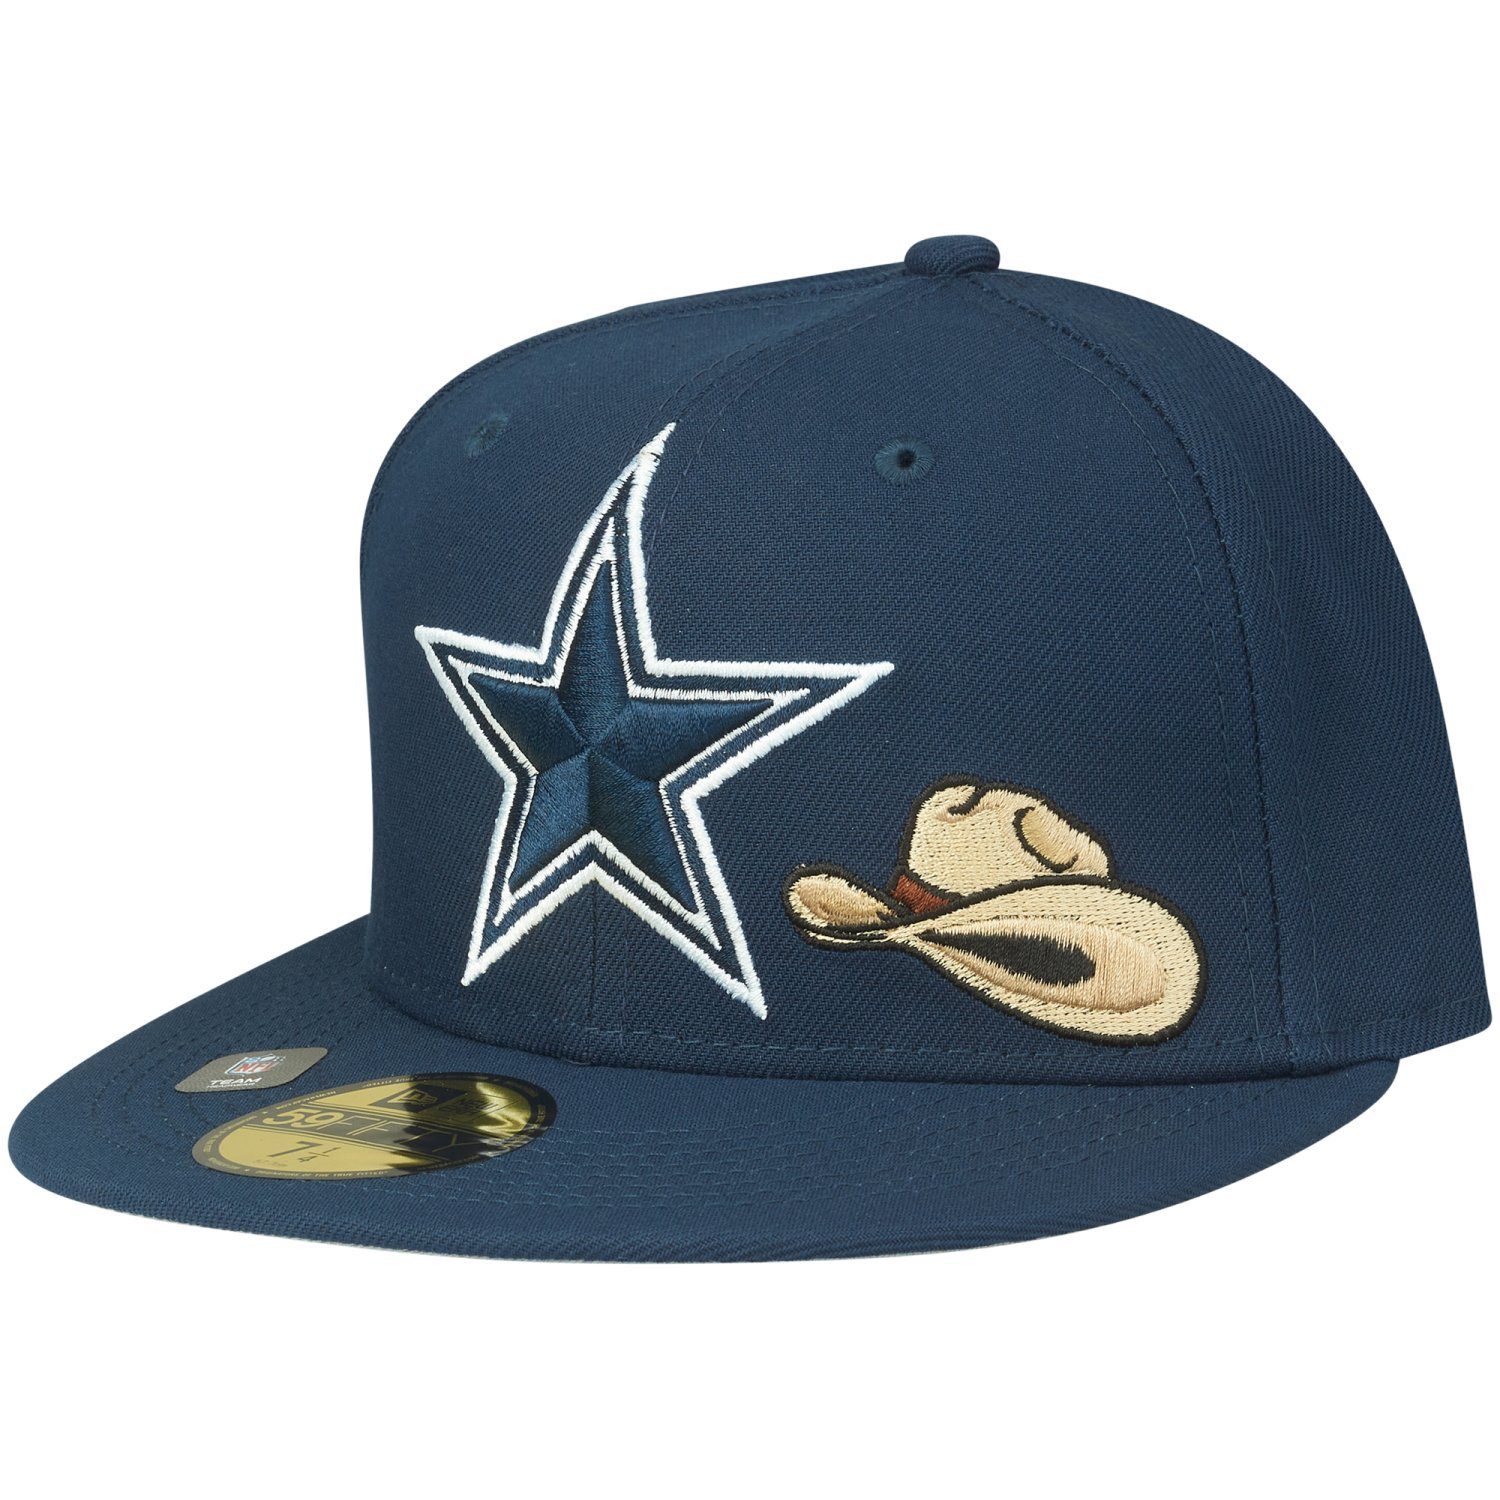 New Era Fitted Cap 59Fifty NFL CITY Dallas Cowboys